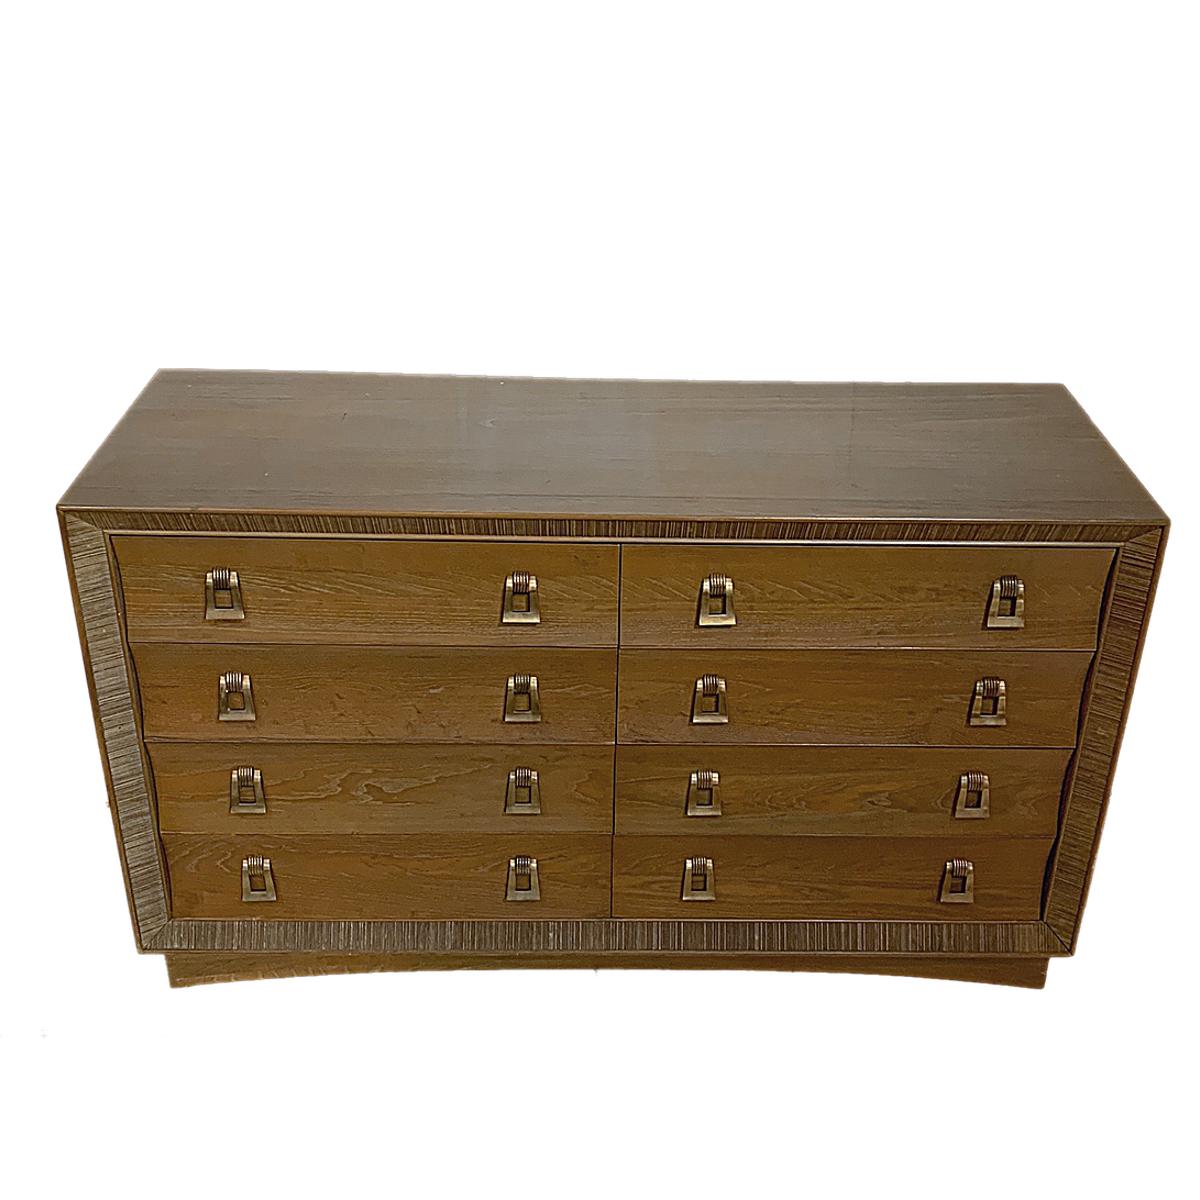 Lovely Brown Saltman of California 8-drawer dresser designed by Paul Frankl. Lovely marriage of Art Deco and Mid-Century Modern aesthetic. Gorgeous coursed oak with combed oak detailing. Decorative brass pulls.